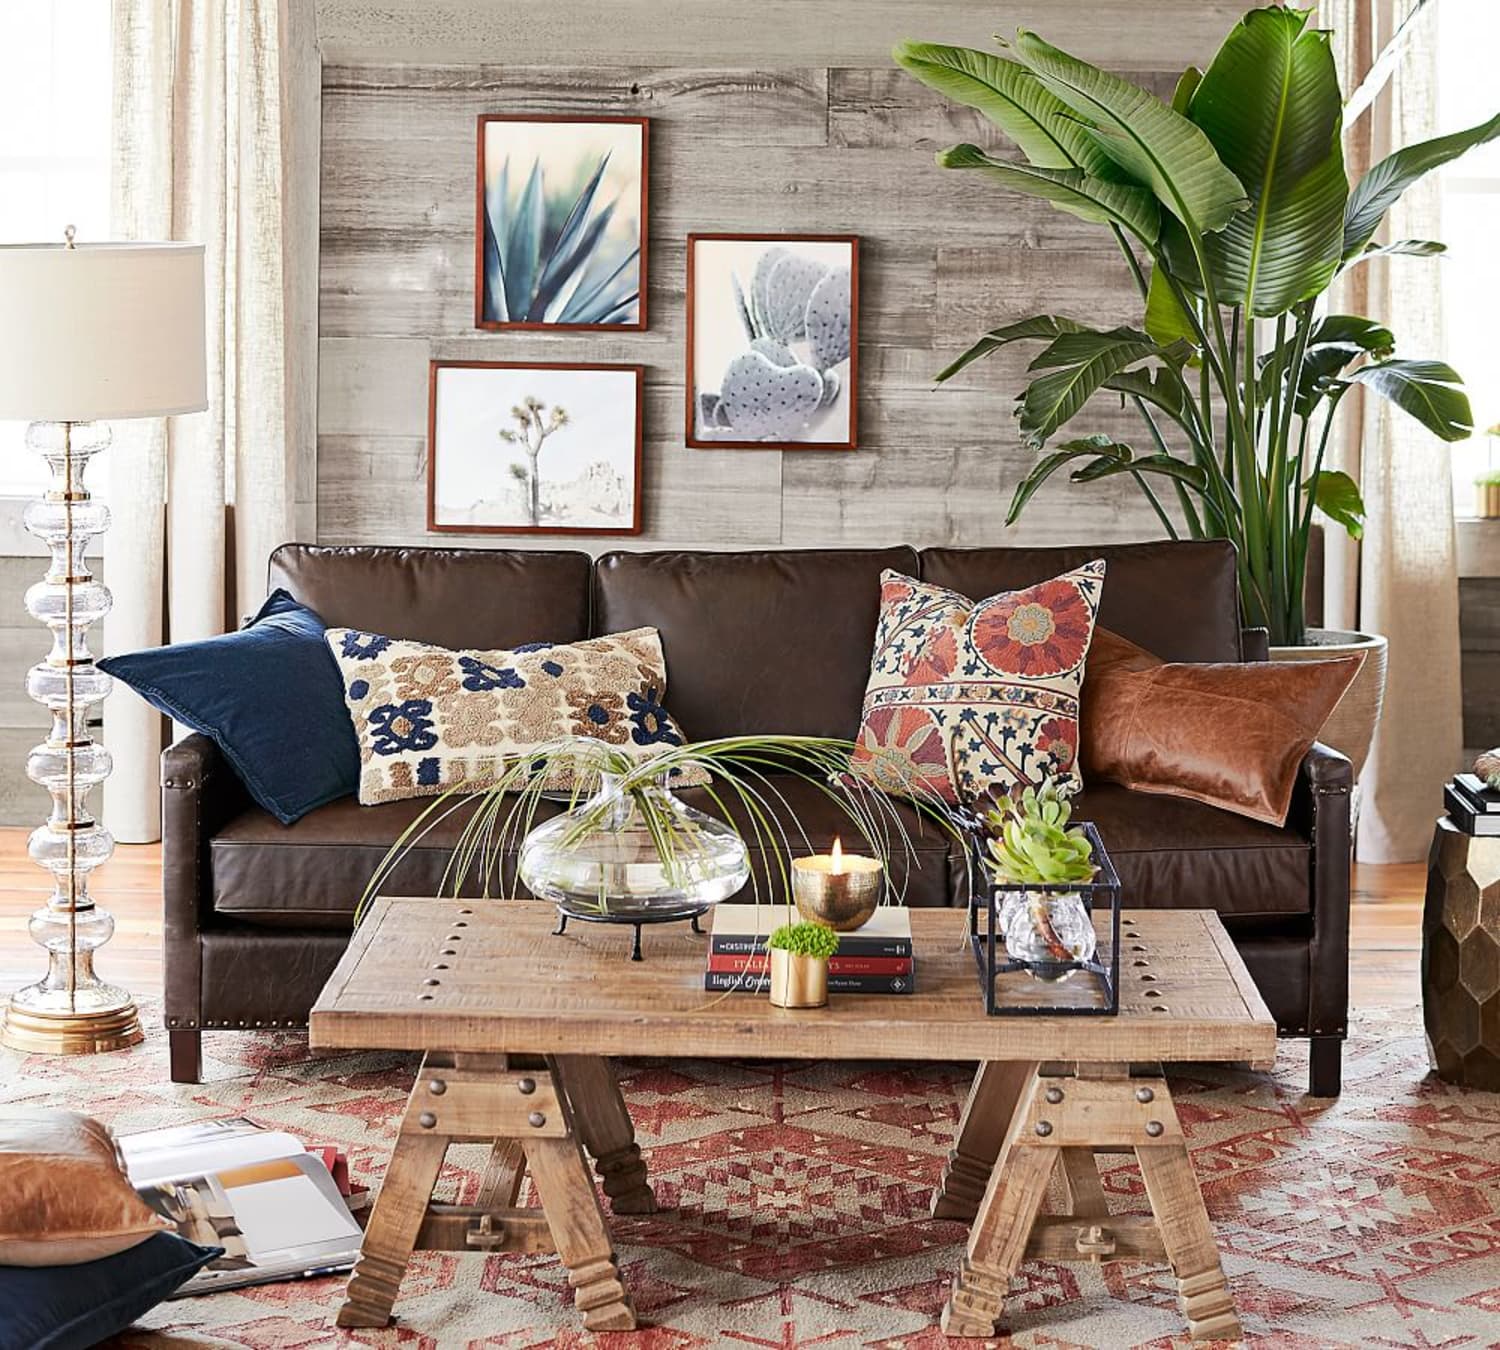 Pottery Barn Is Expanding Their Small Spaces Collection | Apartment Therapy